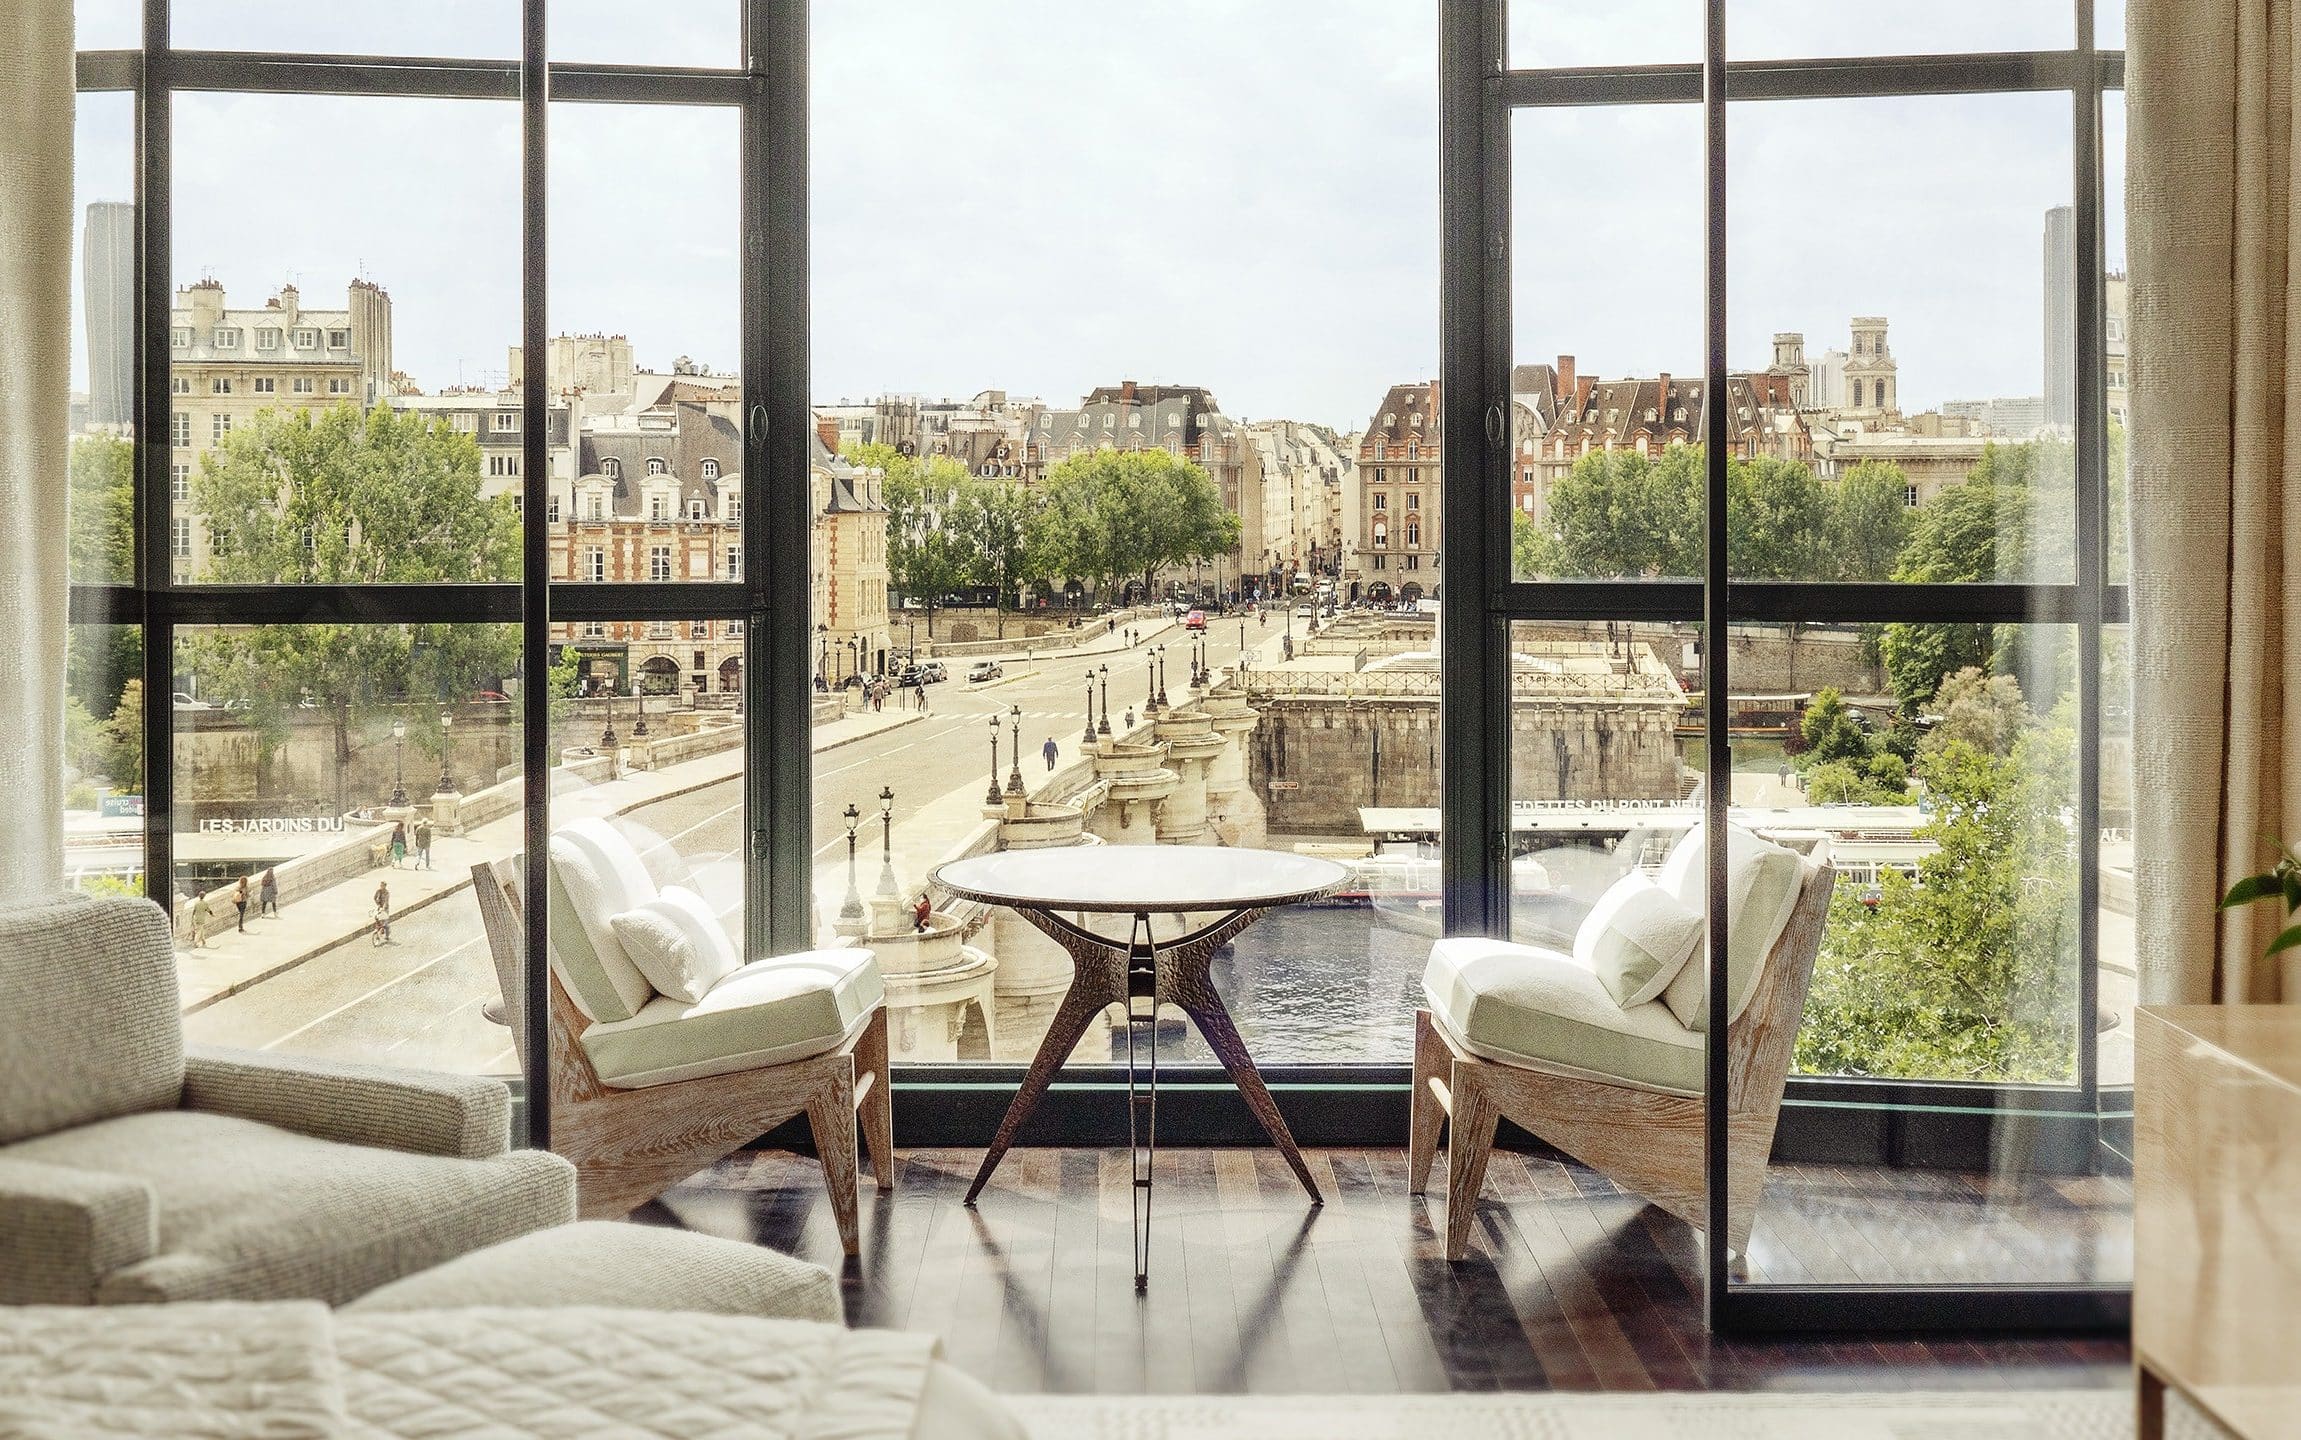 Hotel room at the Cheval Blanc Paris overlooking the streets of Paris.